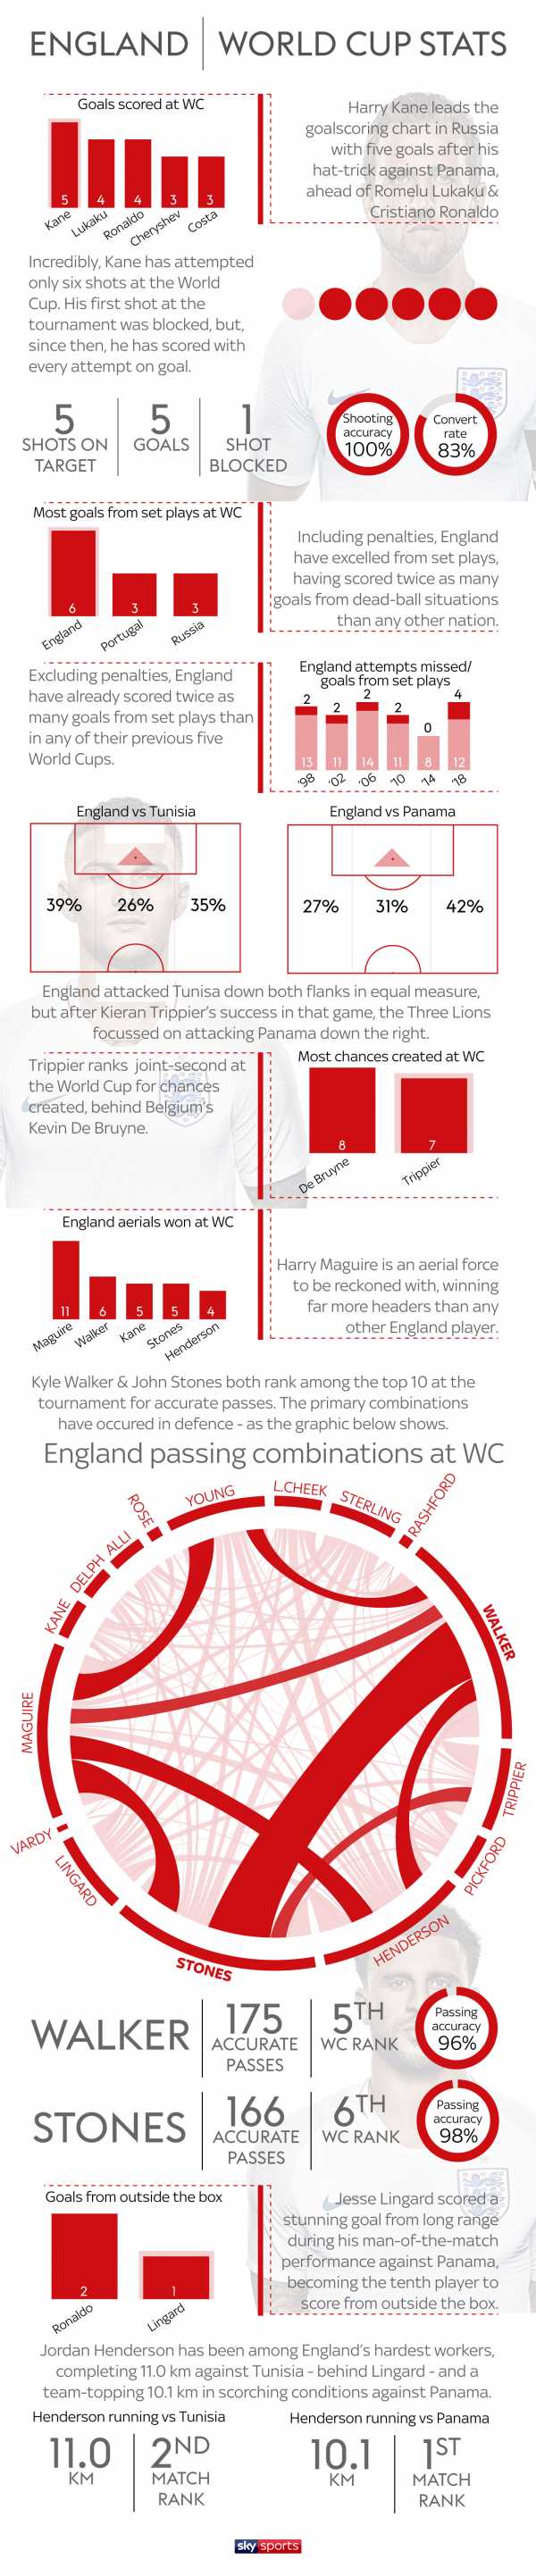 England's strengths and standout players at World Cup